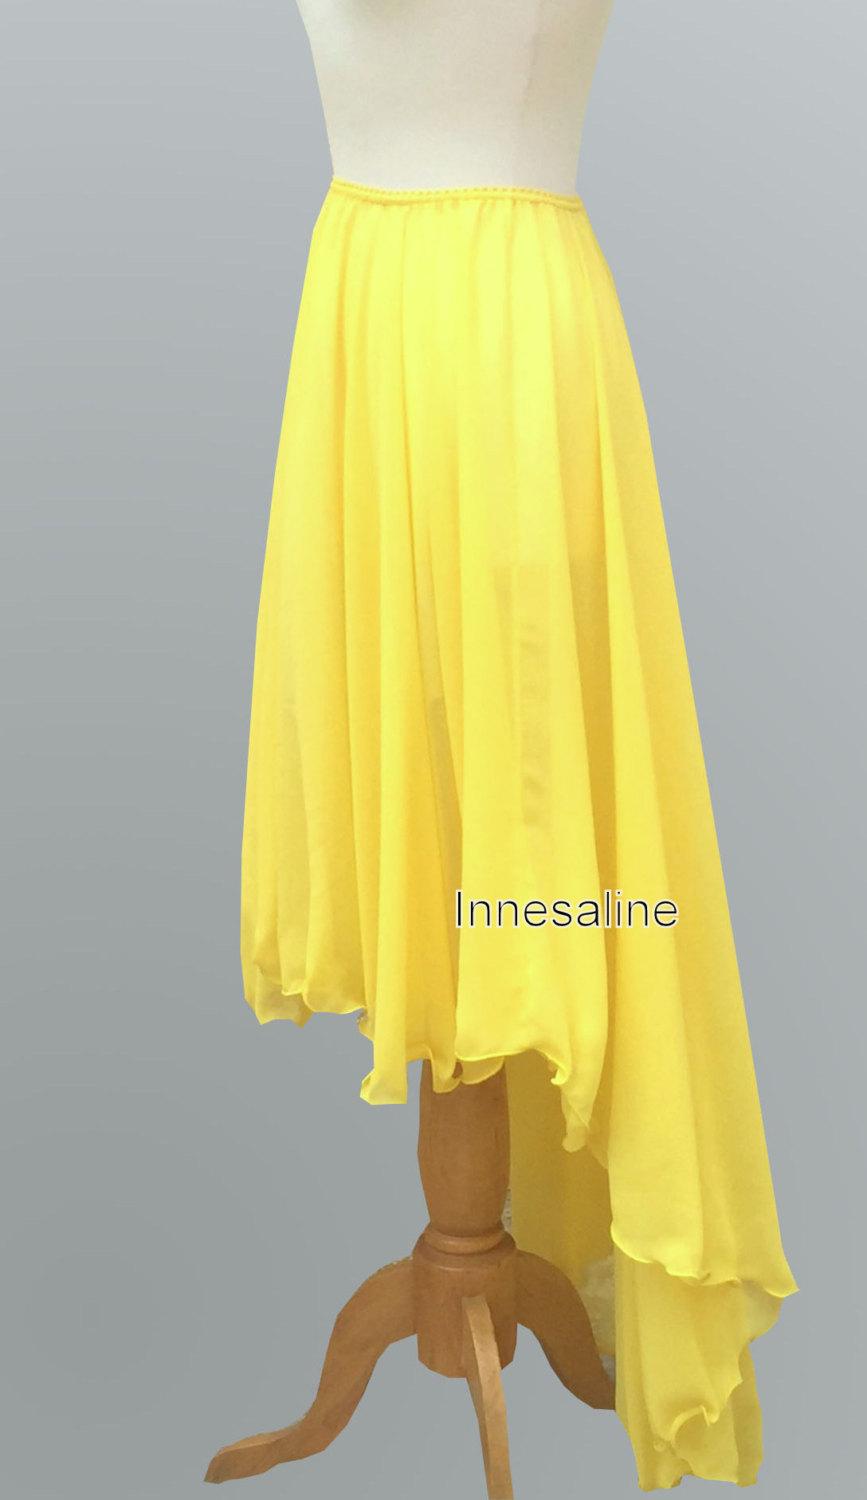 Mariage - Assymetric chiffon hight low skirt  in bright yellow  color